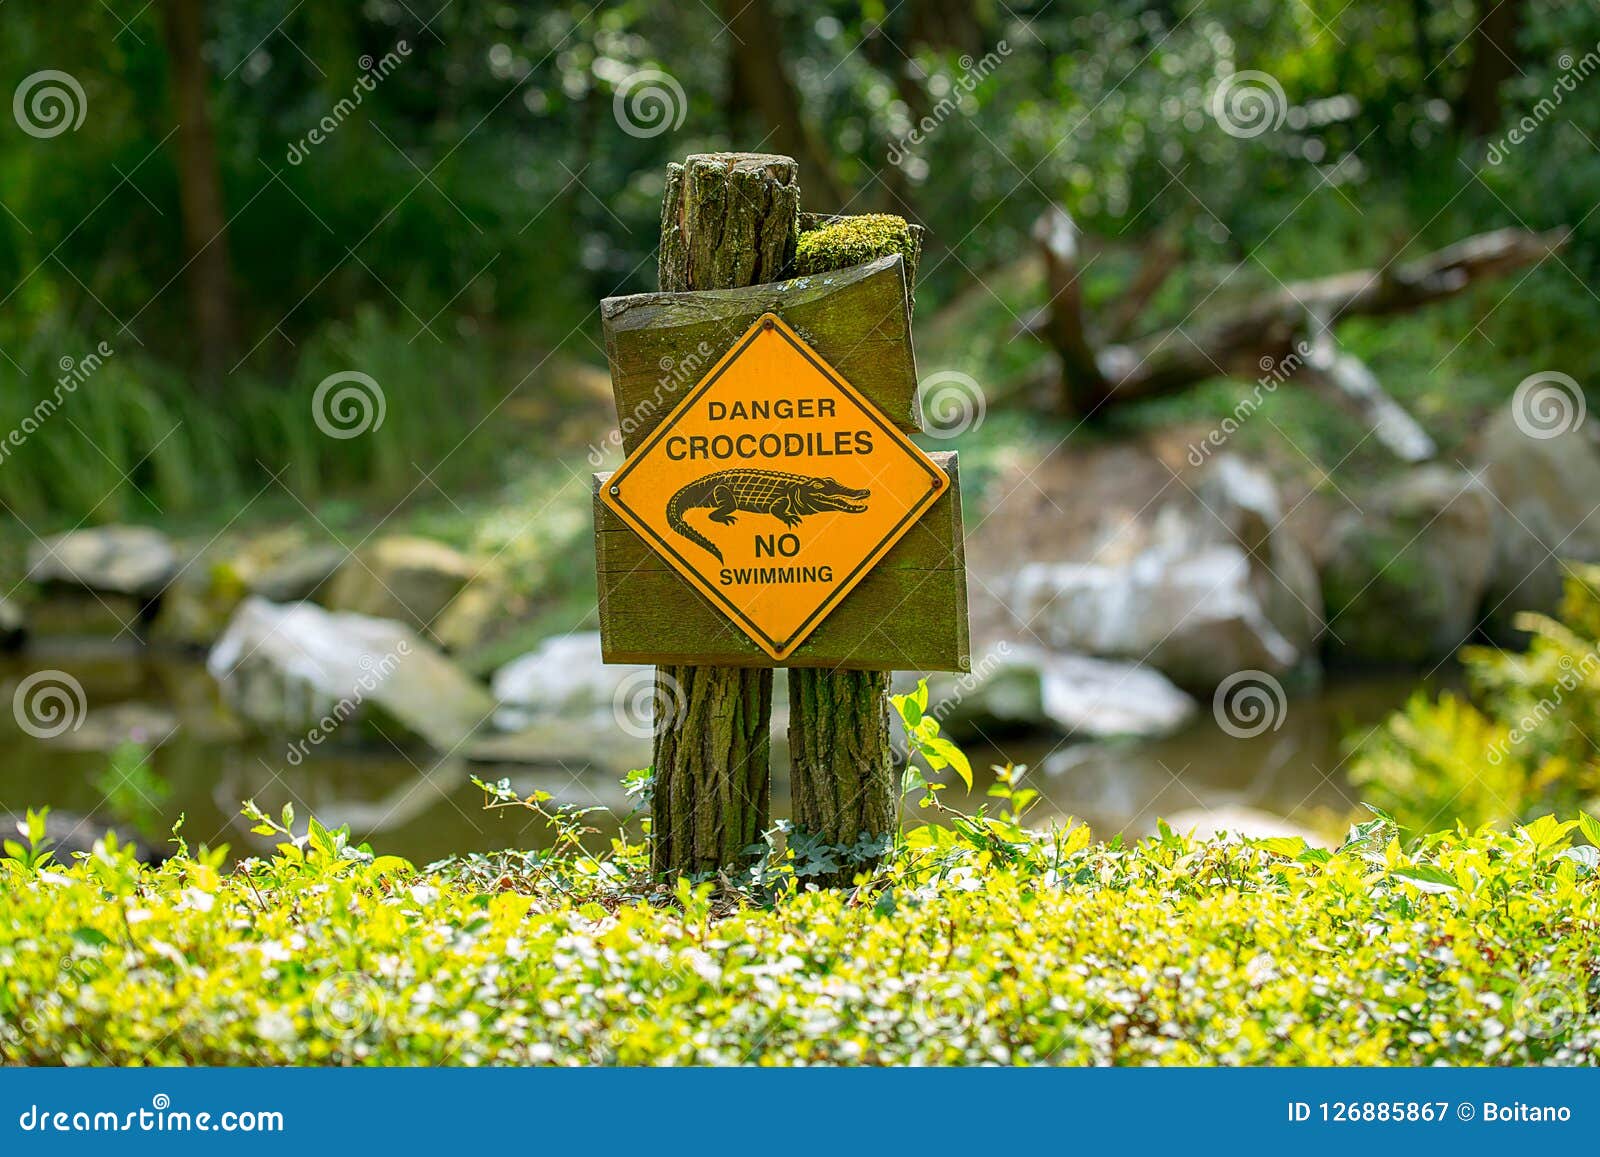 danger crocodiles, no swimming - warning sign located on the shore of the lake.